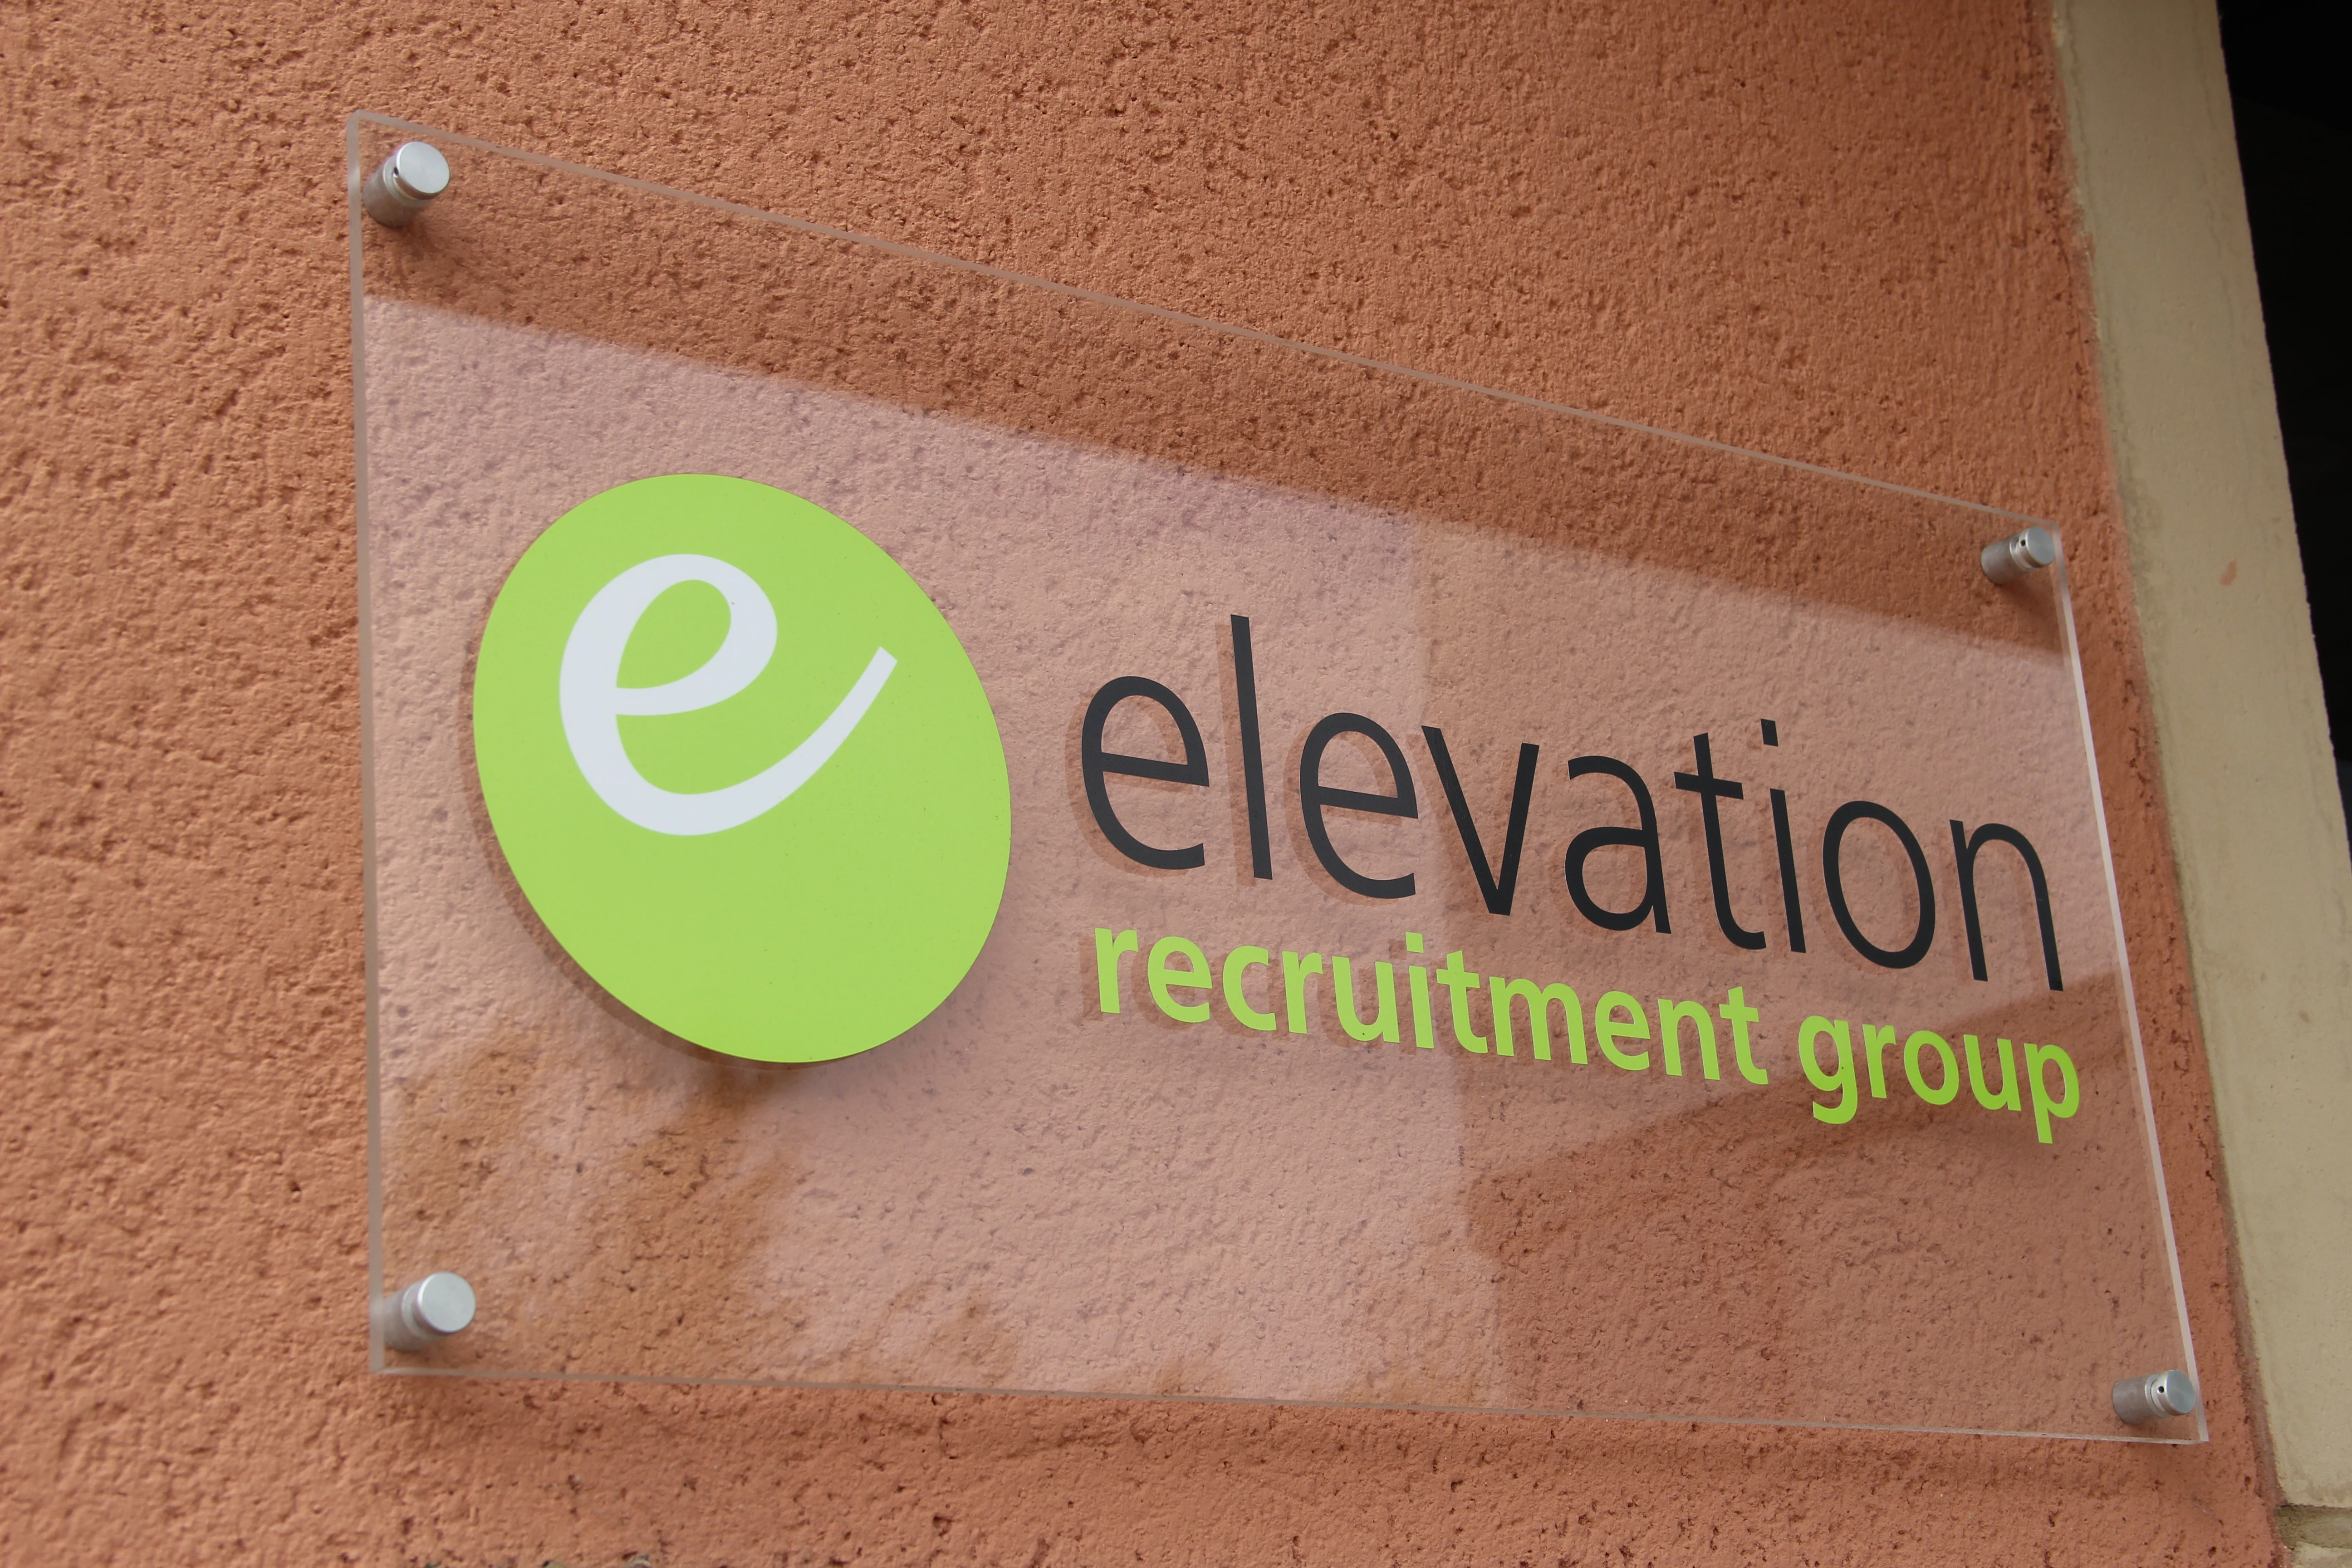 Elevation Wakefield employs 35% more staff than it did in 2017